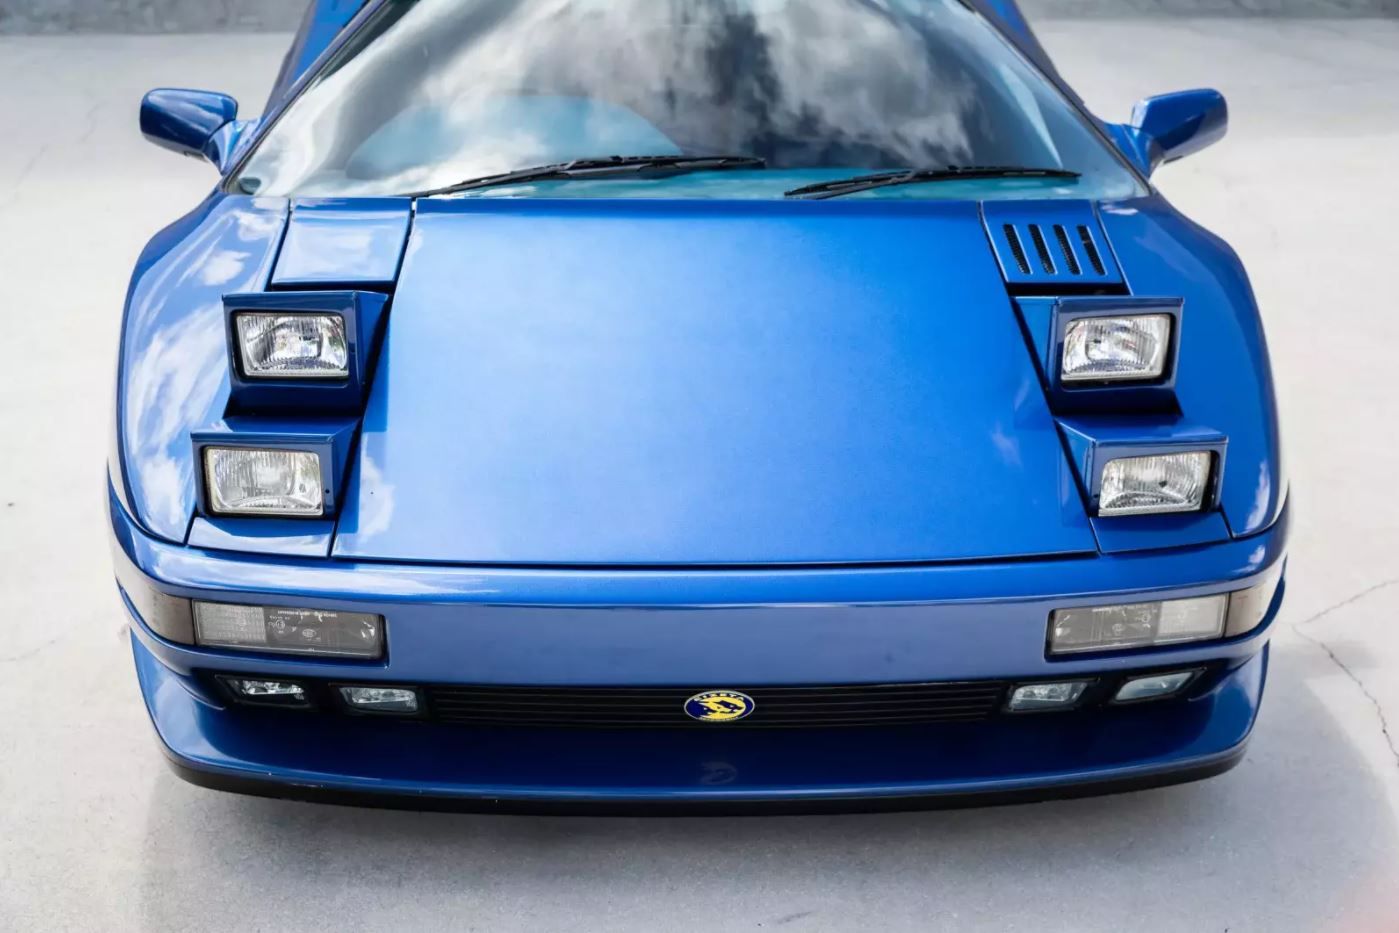 The Cizeta V16T featured a striking combination of 4 pop-up headlights.